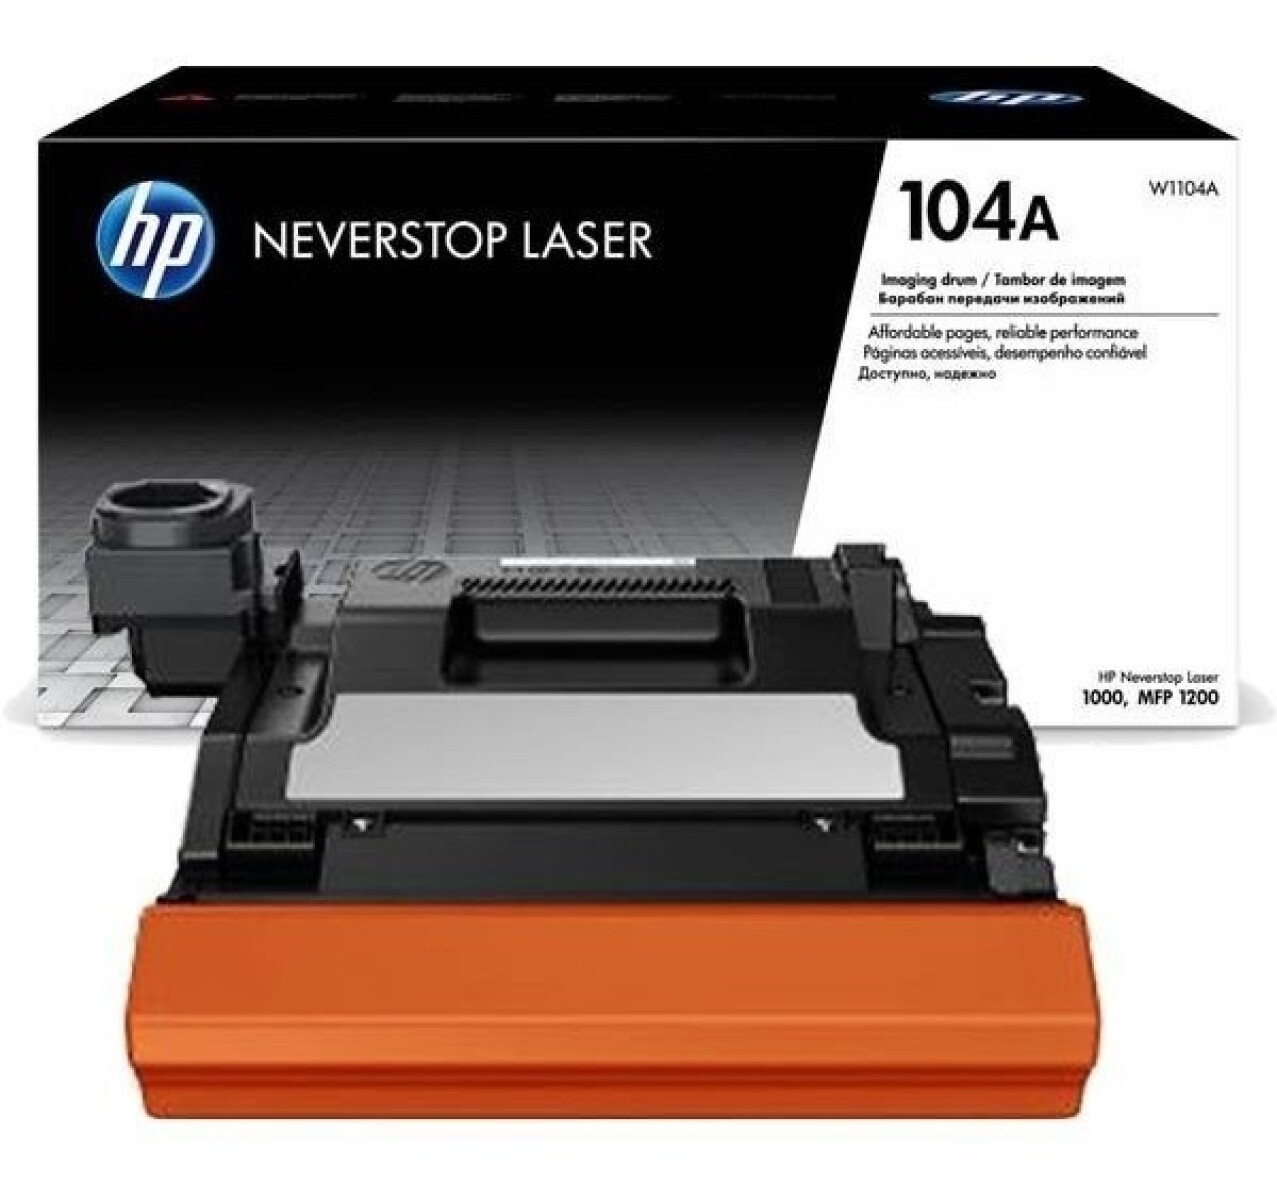 HP IMAGE DRUM W1104A 104A NEVERSTOP 1000/1001/1020/1200 - 5890 